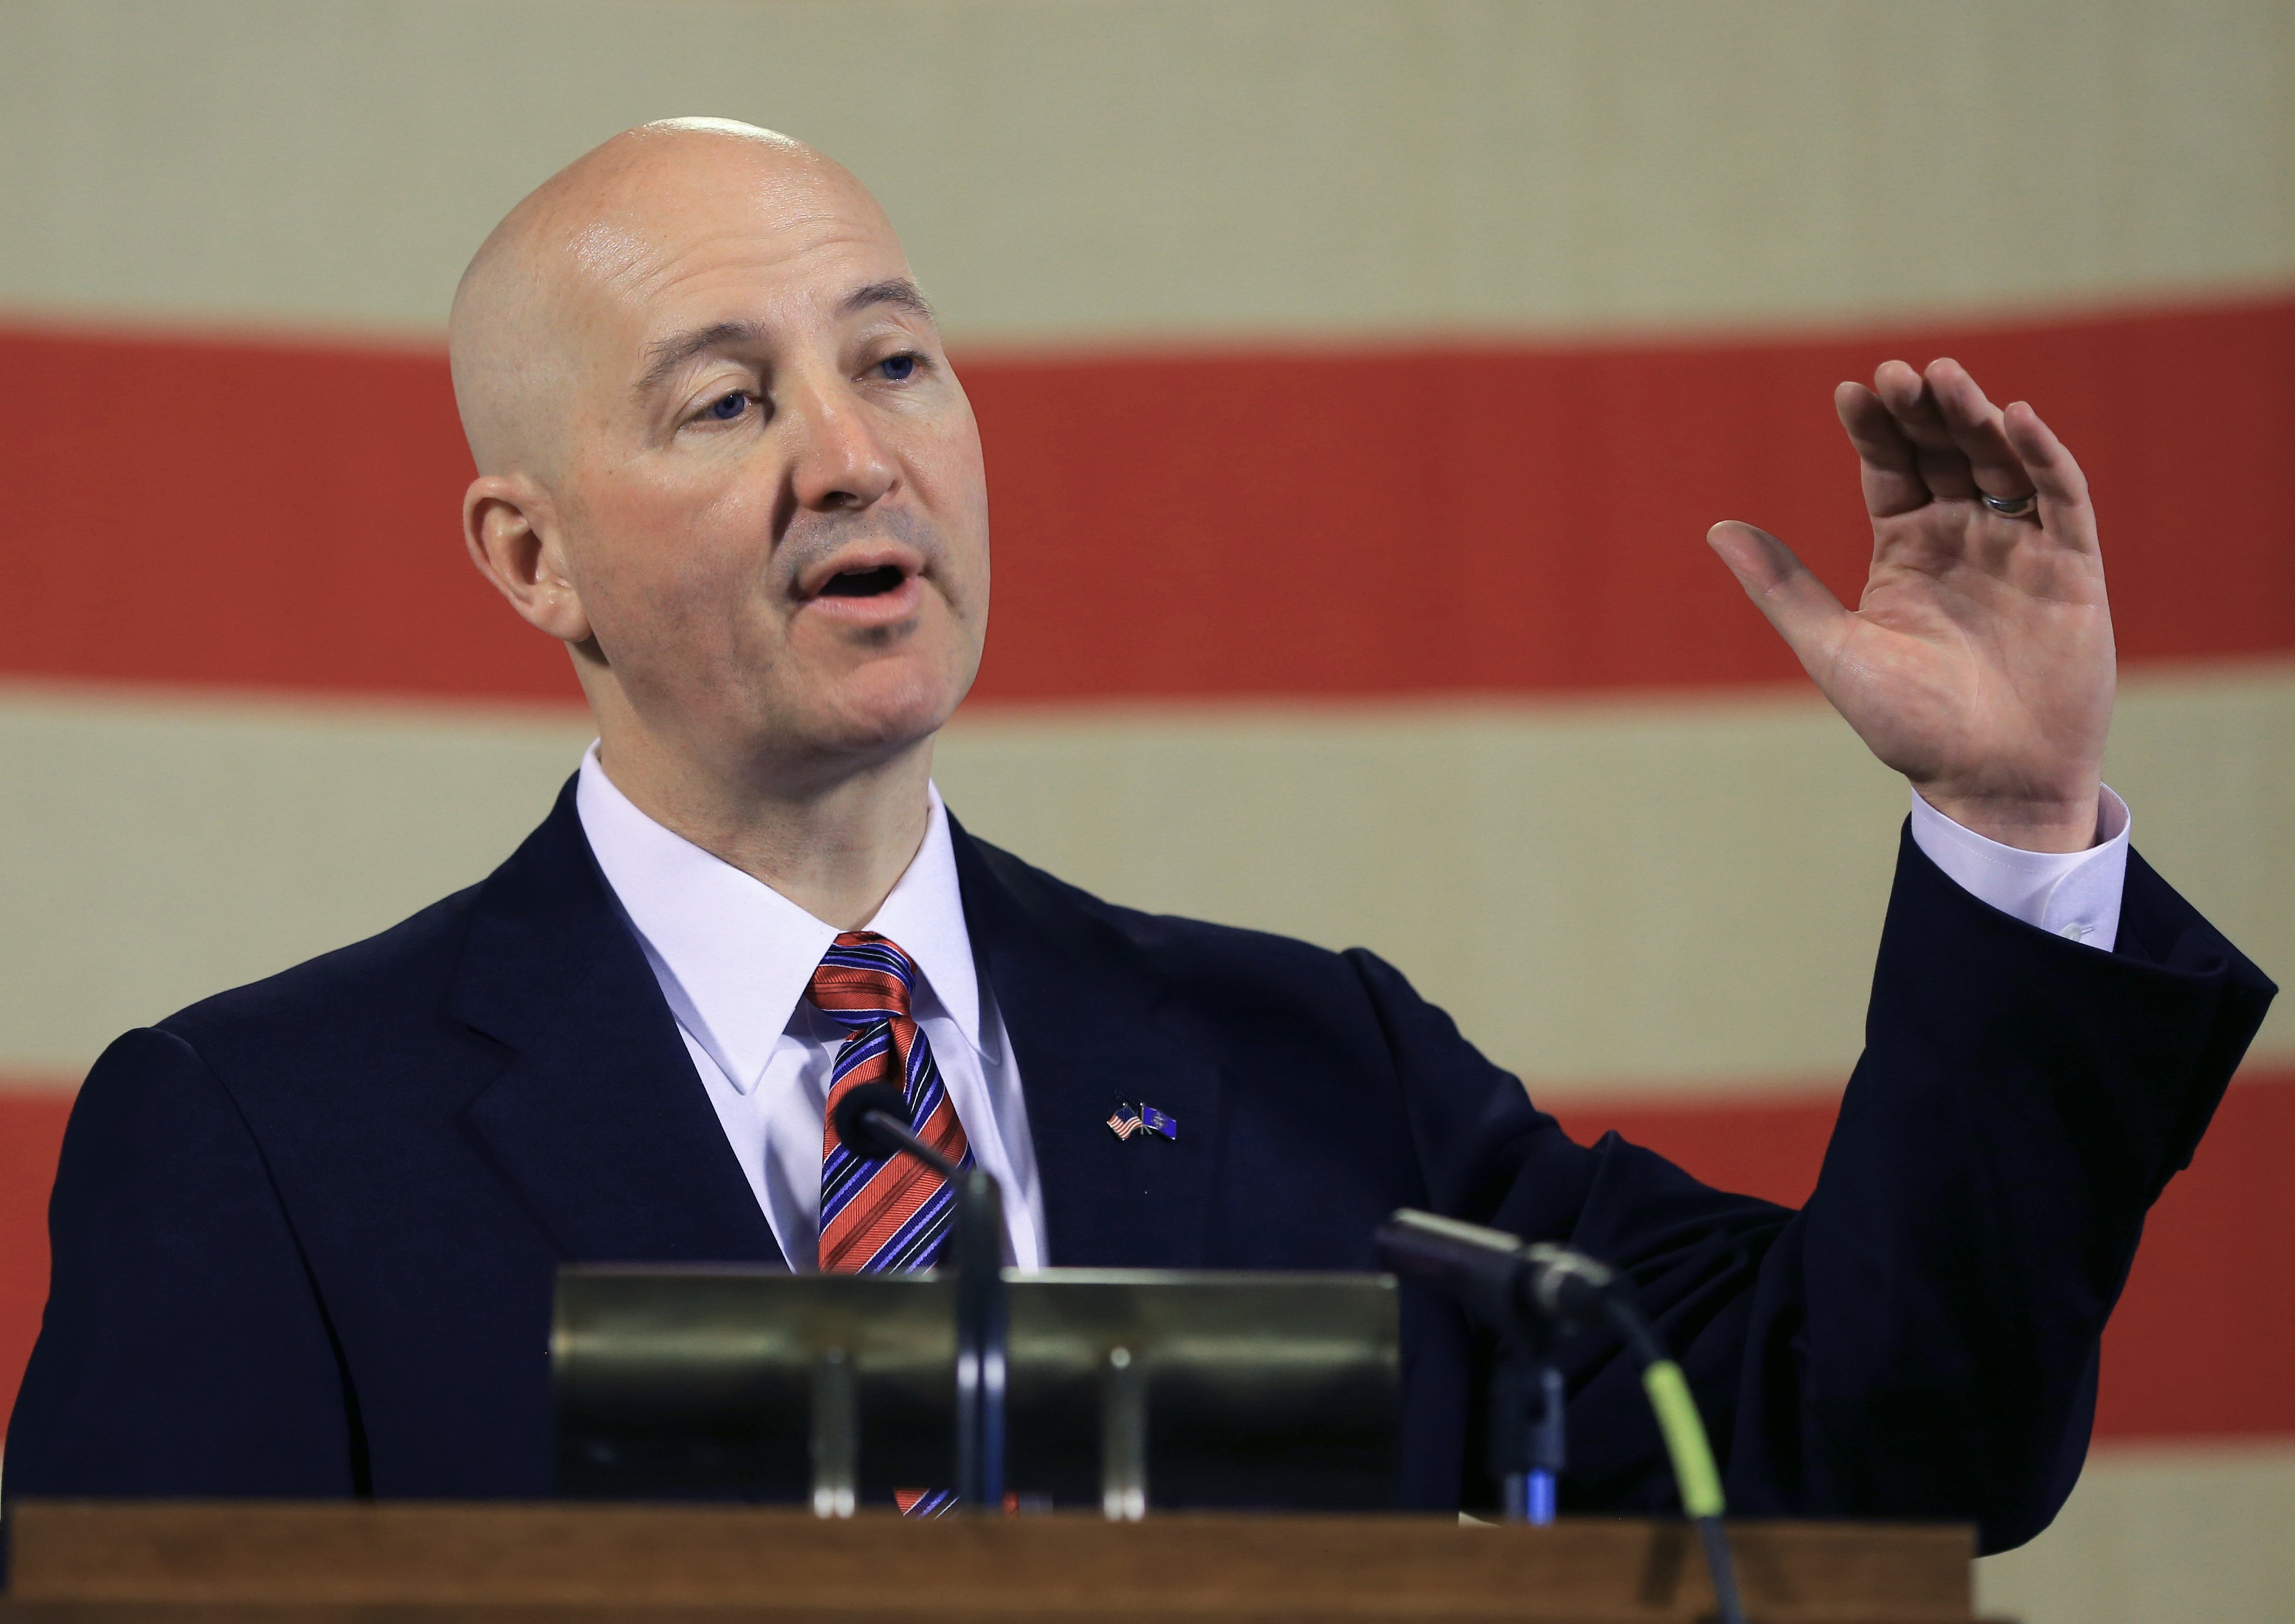 Neb. Gov. Pete Ricketts gestures during a news conference in Lincoln, Neb. on May 20, 2015. (Nati Harnik—AP)